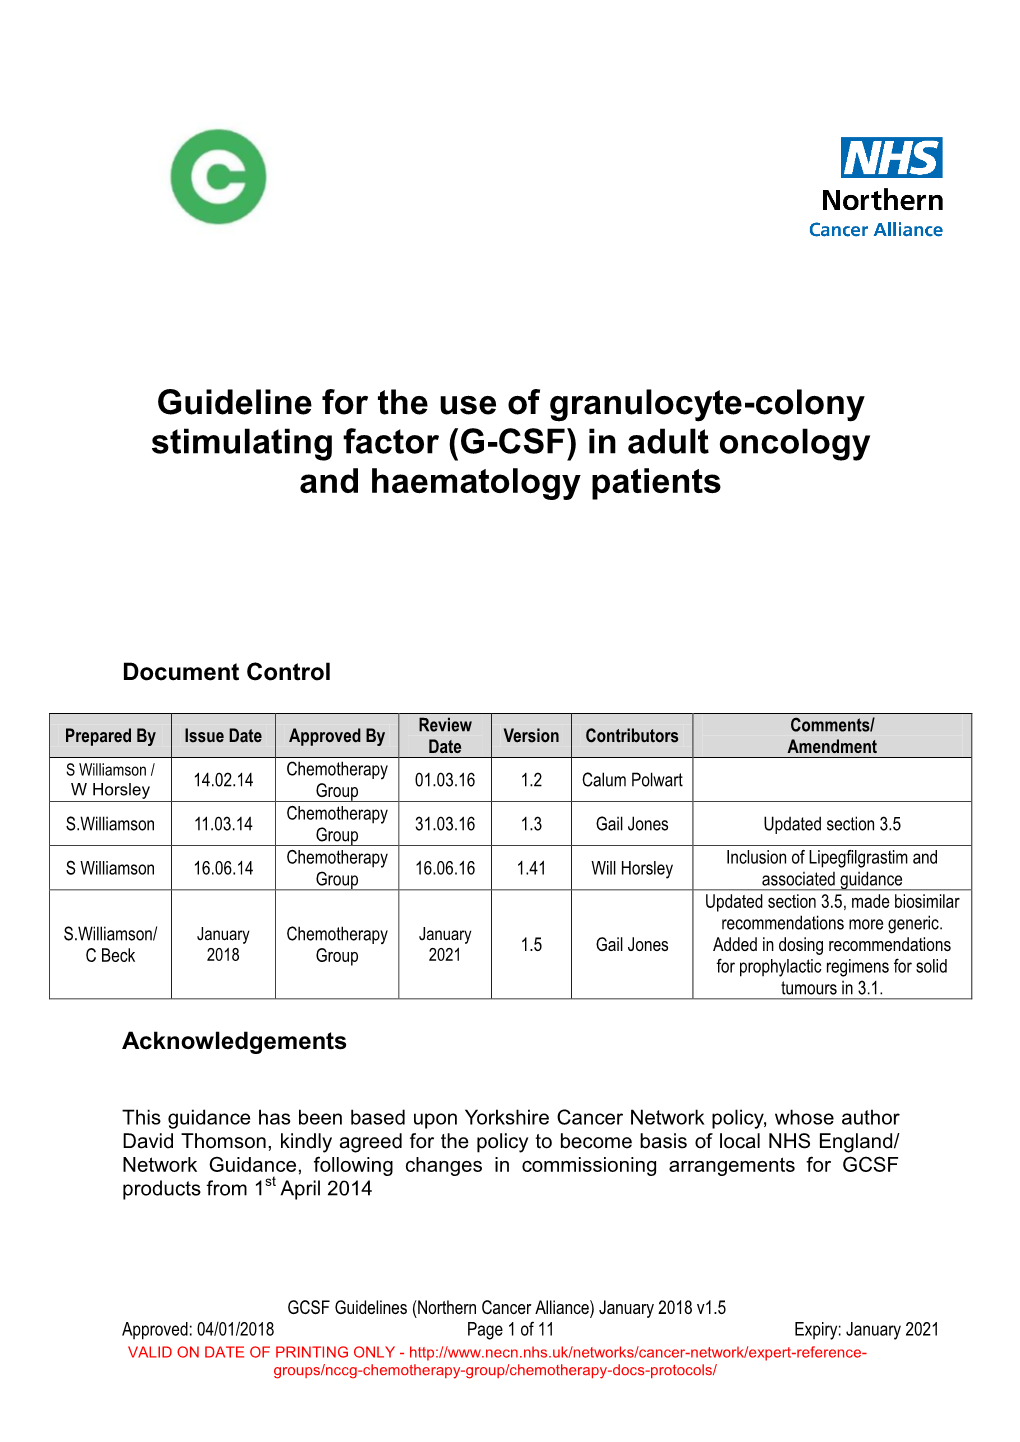 Guideline for the Use of Granulocyte-Colony Stimulating Factor (G-CSF) in Adult Oncology and Haematology Patients